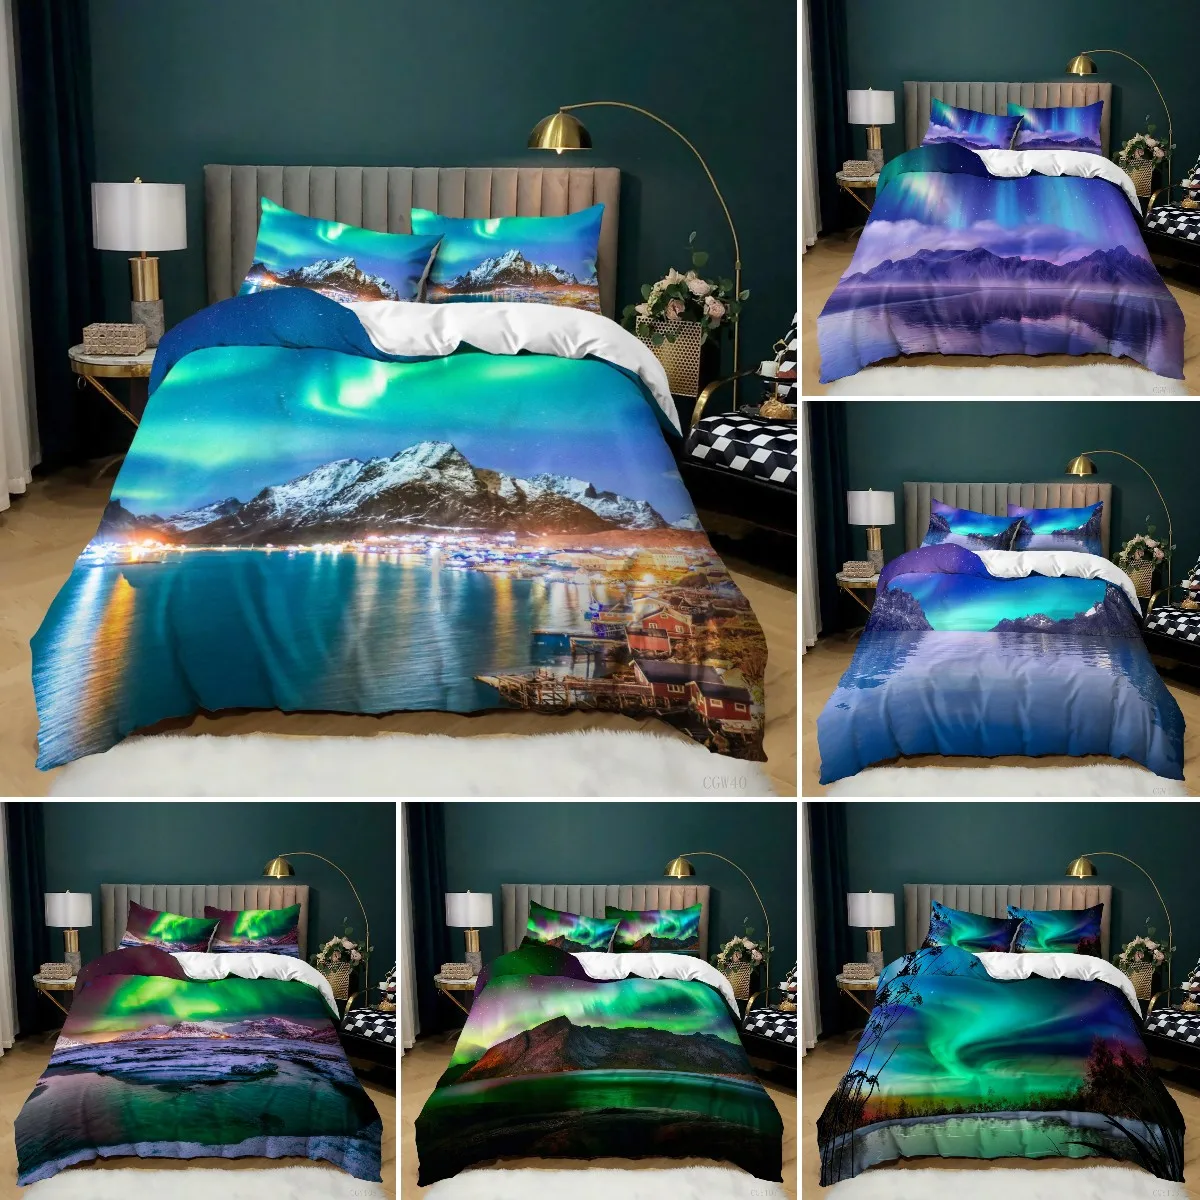 

Aurora Borealis Duvet Cover King/Queen Size,Pale Weather Over The Hills with Waterfall Creek Nature Landscape Bedding Set,green